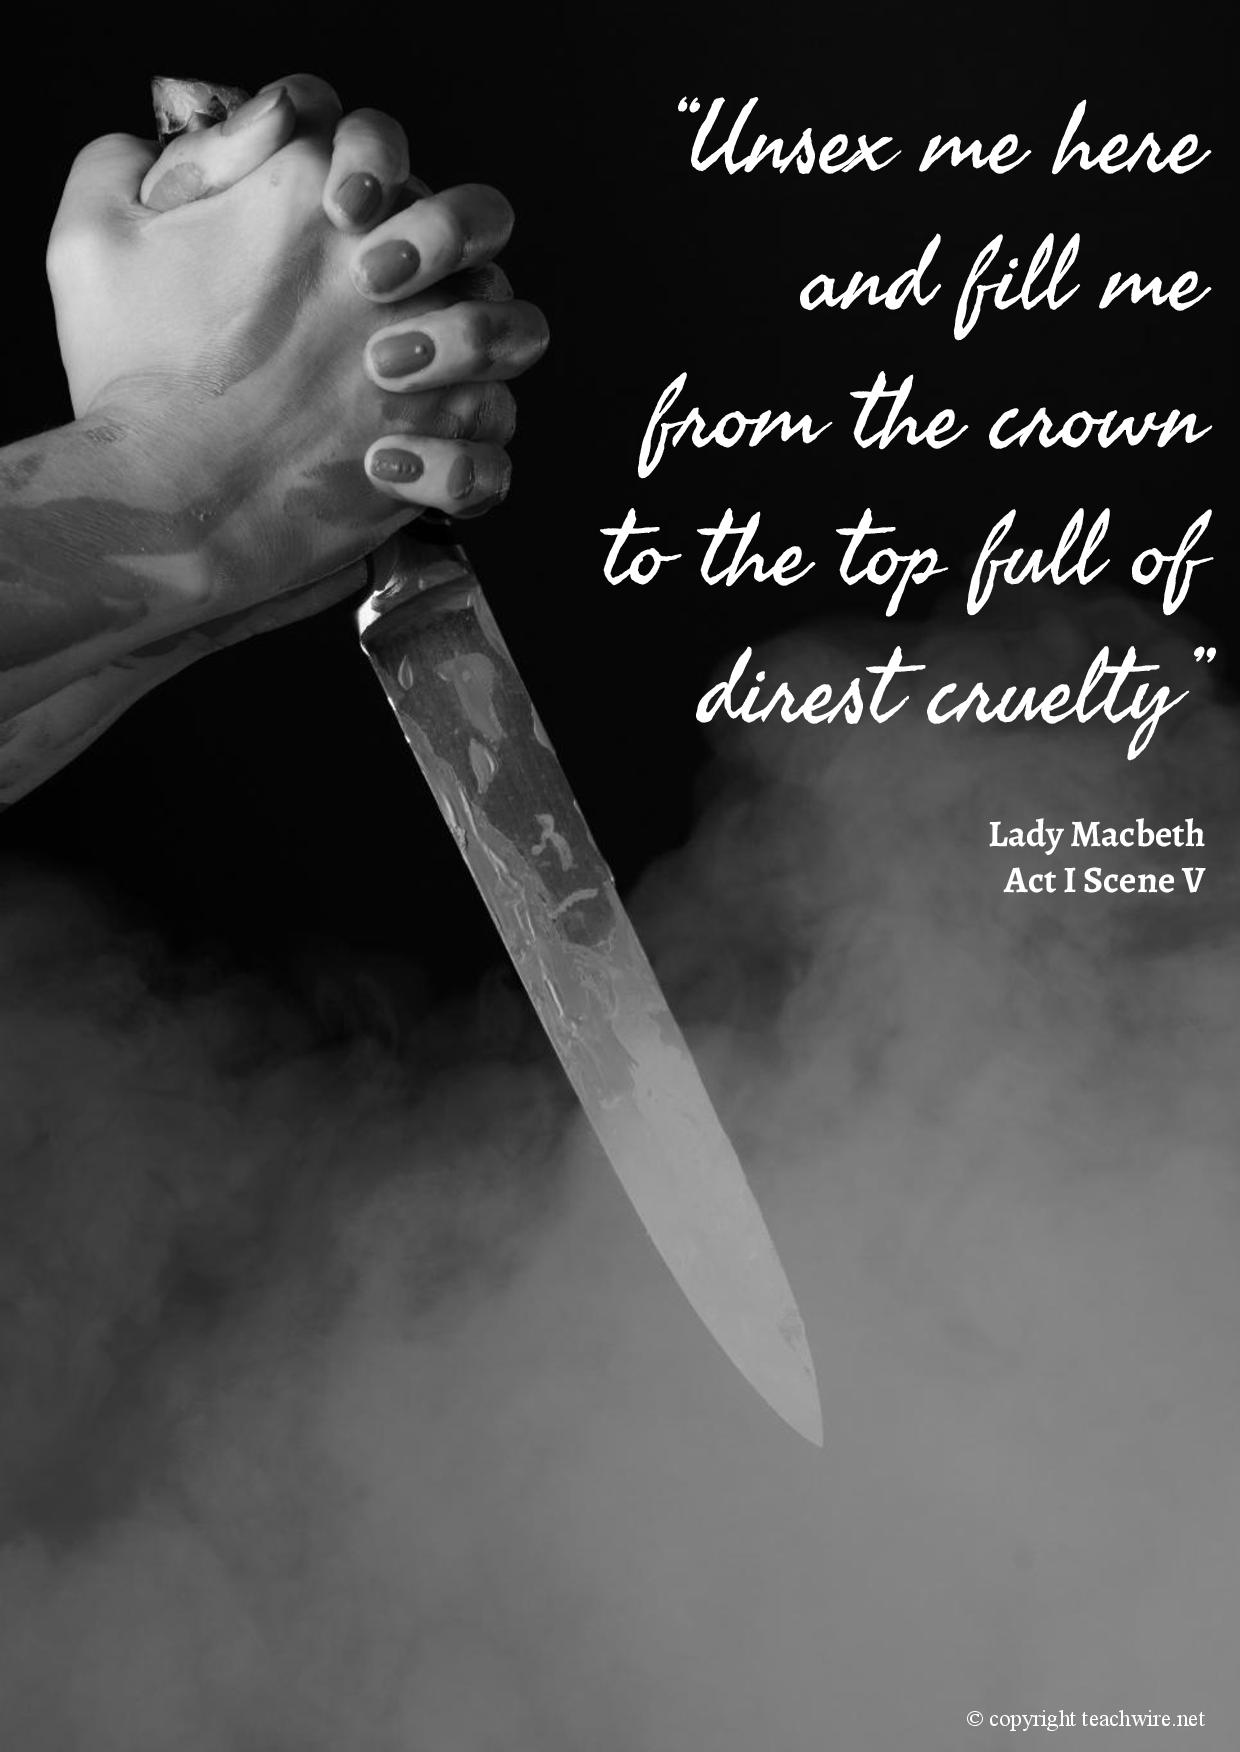 Lady Macbeth Quotes – Key Lines For Studying Shakespeare's Macbeth In Ks4 English